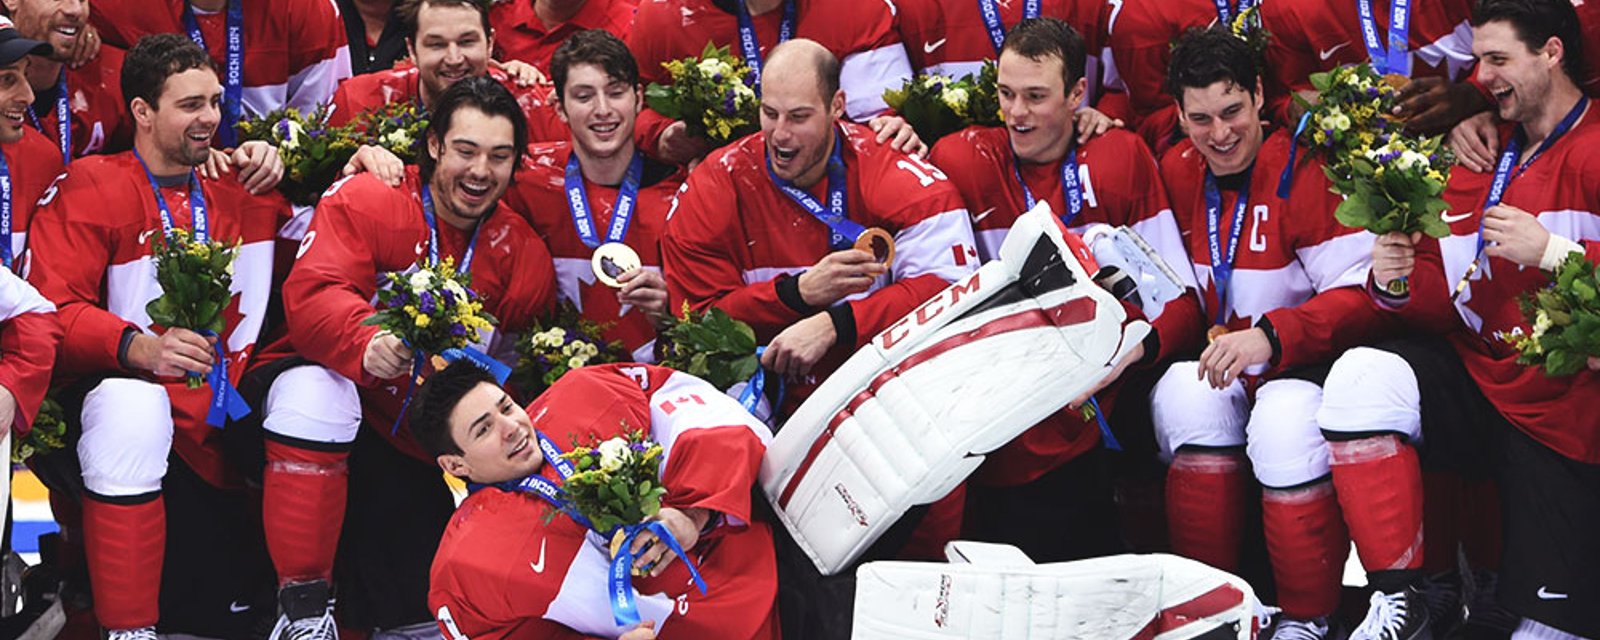 Breaking: Team Canada unveils coaching staff for 2018 Winter Olympics